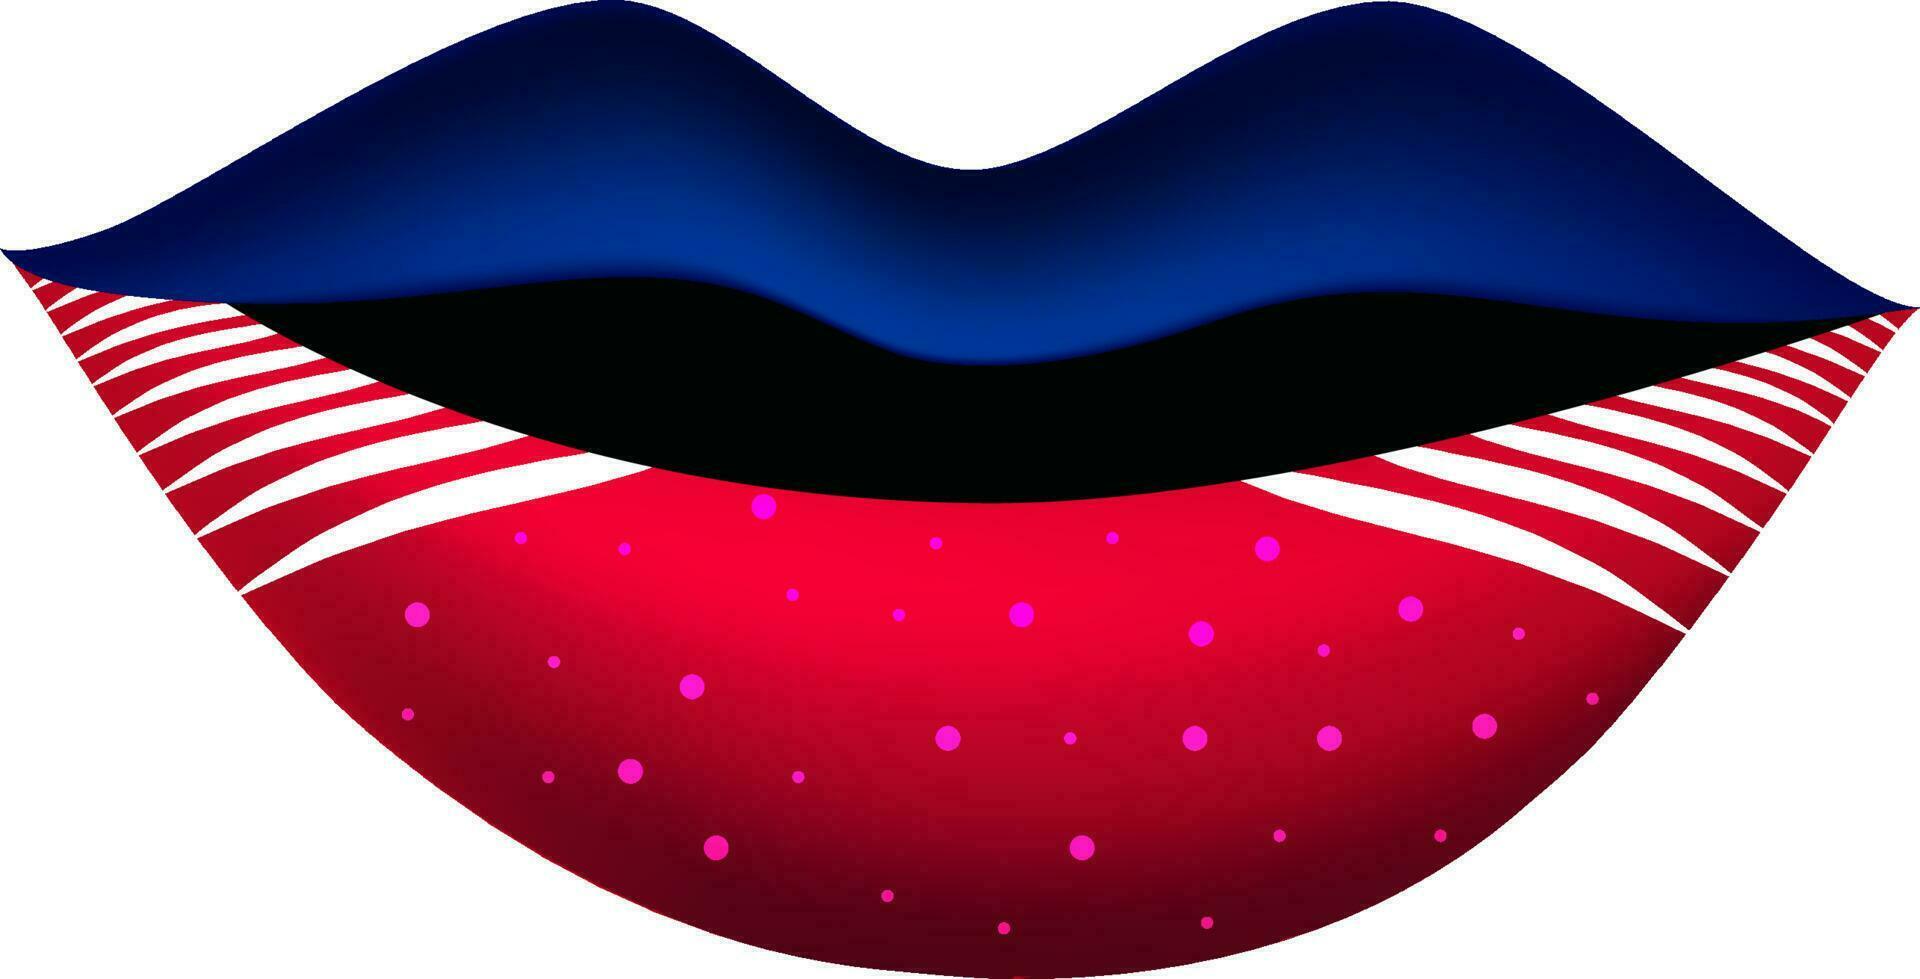 Glossy lips painted in blue, red and white colors. vector